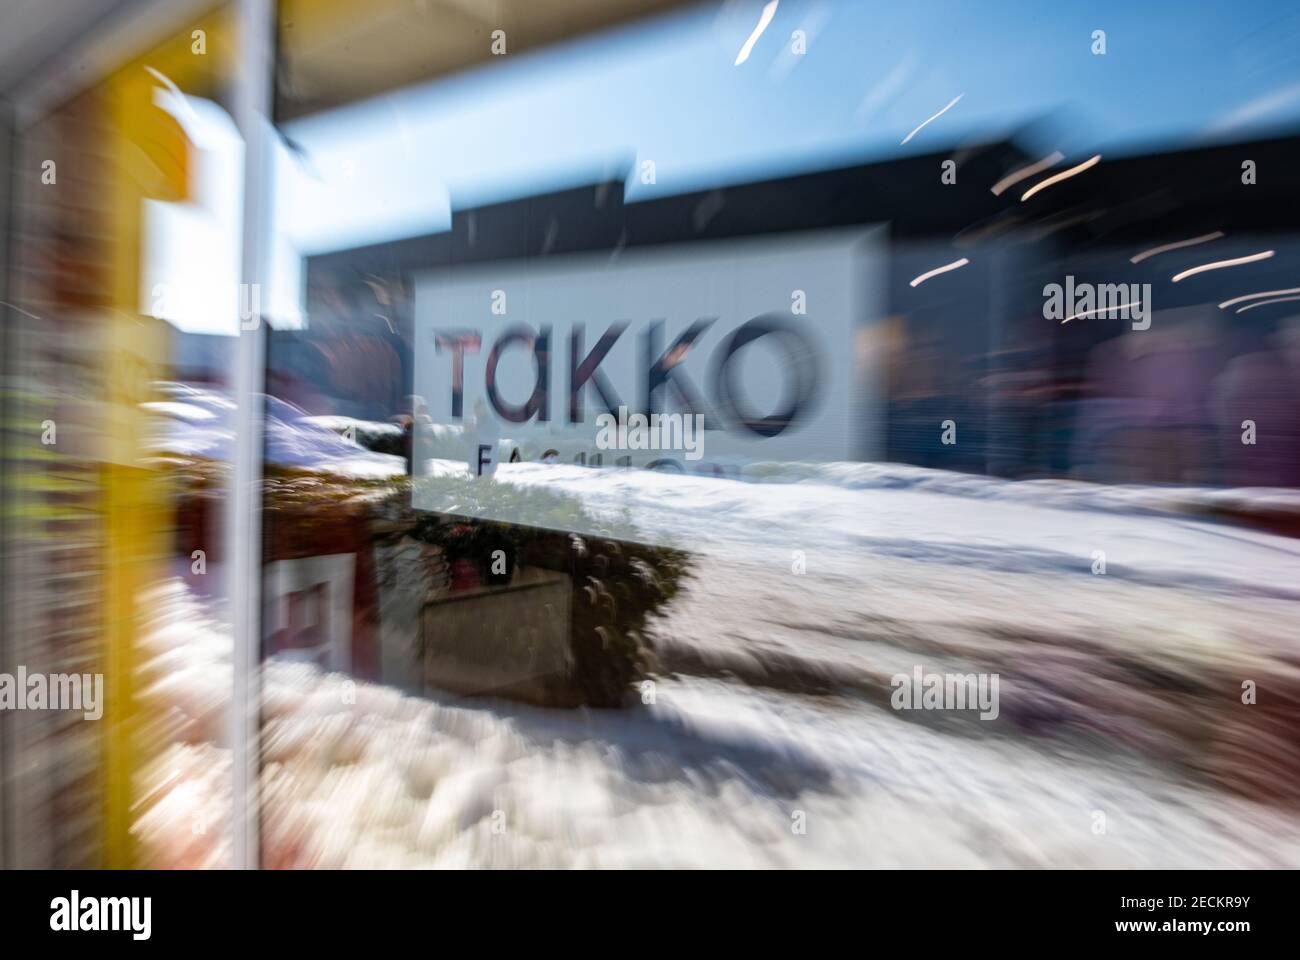 Telgte, Germany. 12th Feb, 2021. The Takko logo of a Takko Fashion store in  Telgte is stuck on a glass pane. (Taken with a long exposure time - zoomed). Takko ModeMarkt GmbH &